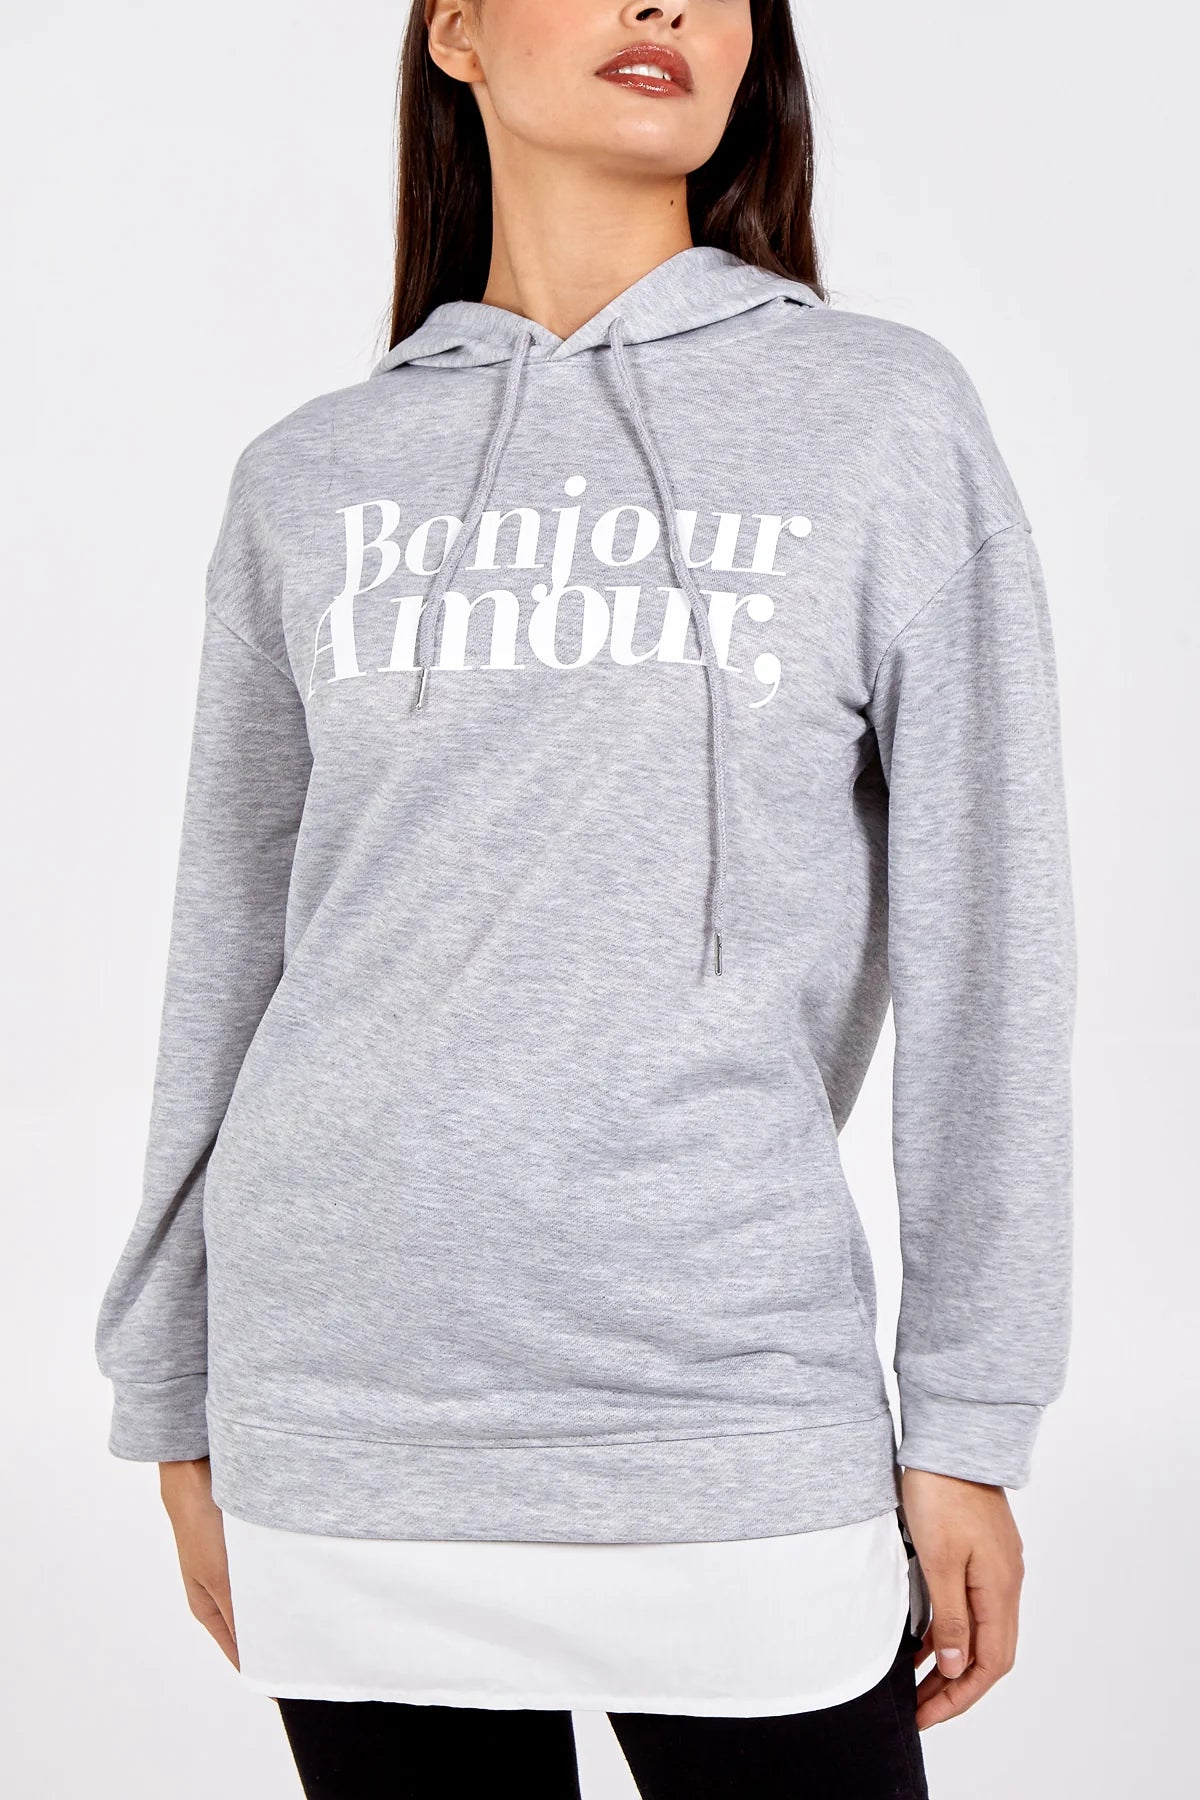 Bonjour Amour Hoodie